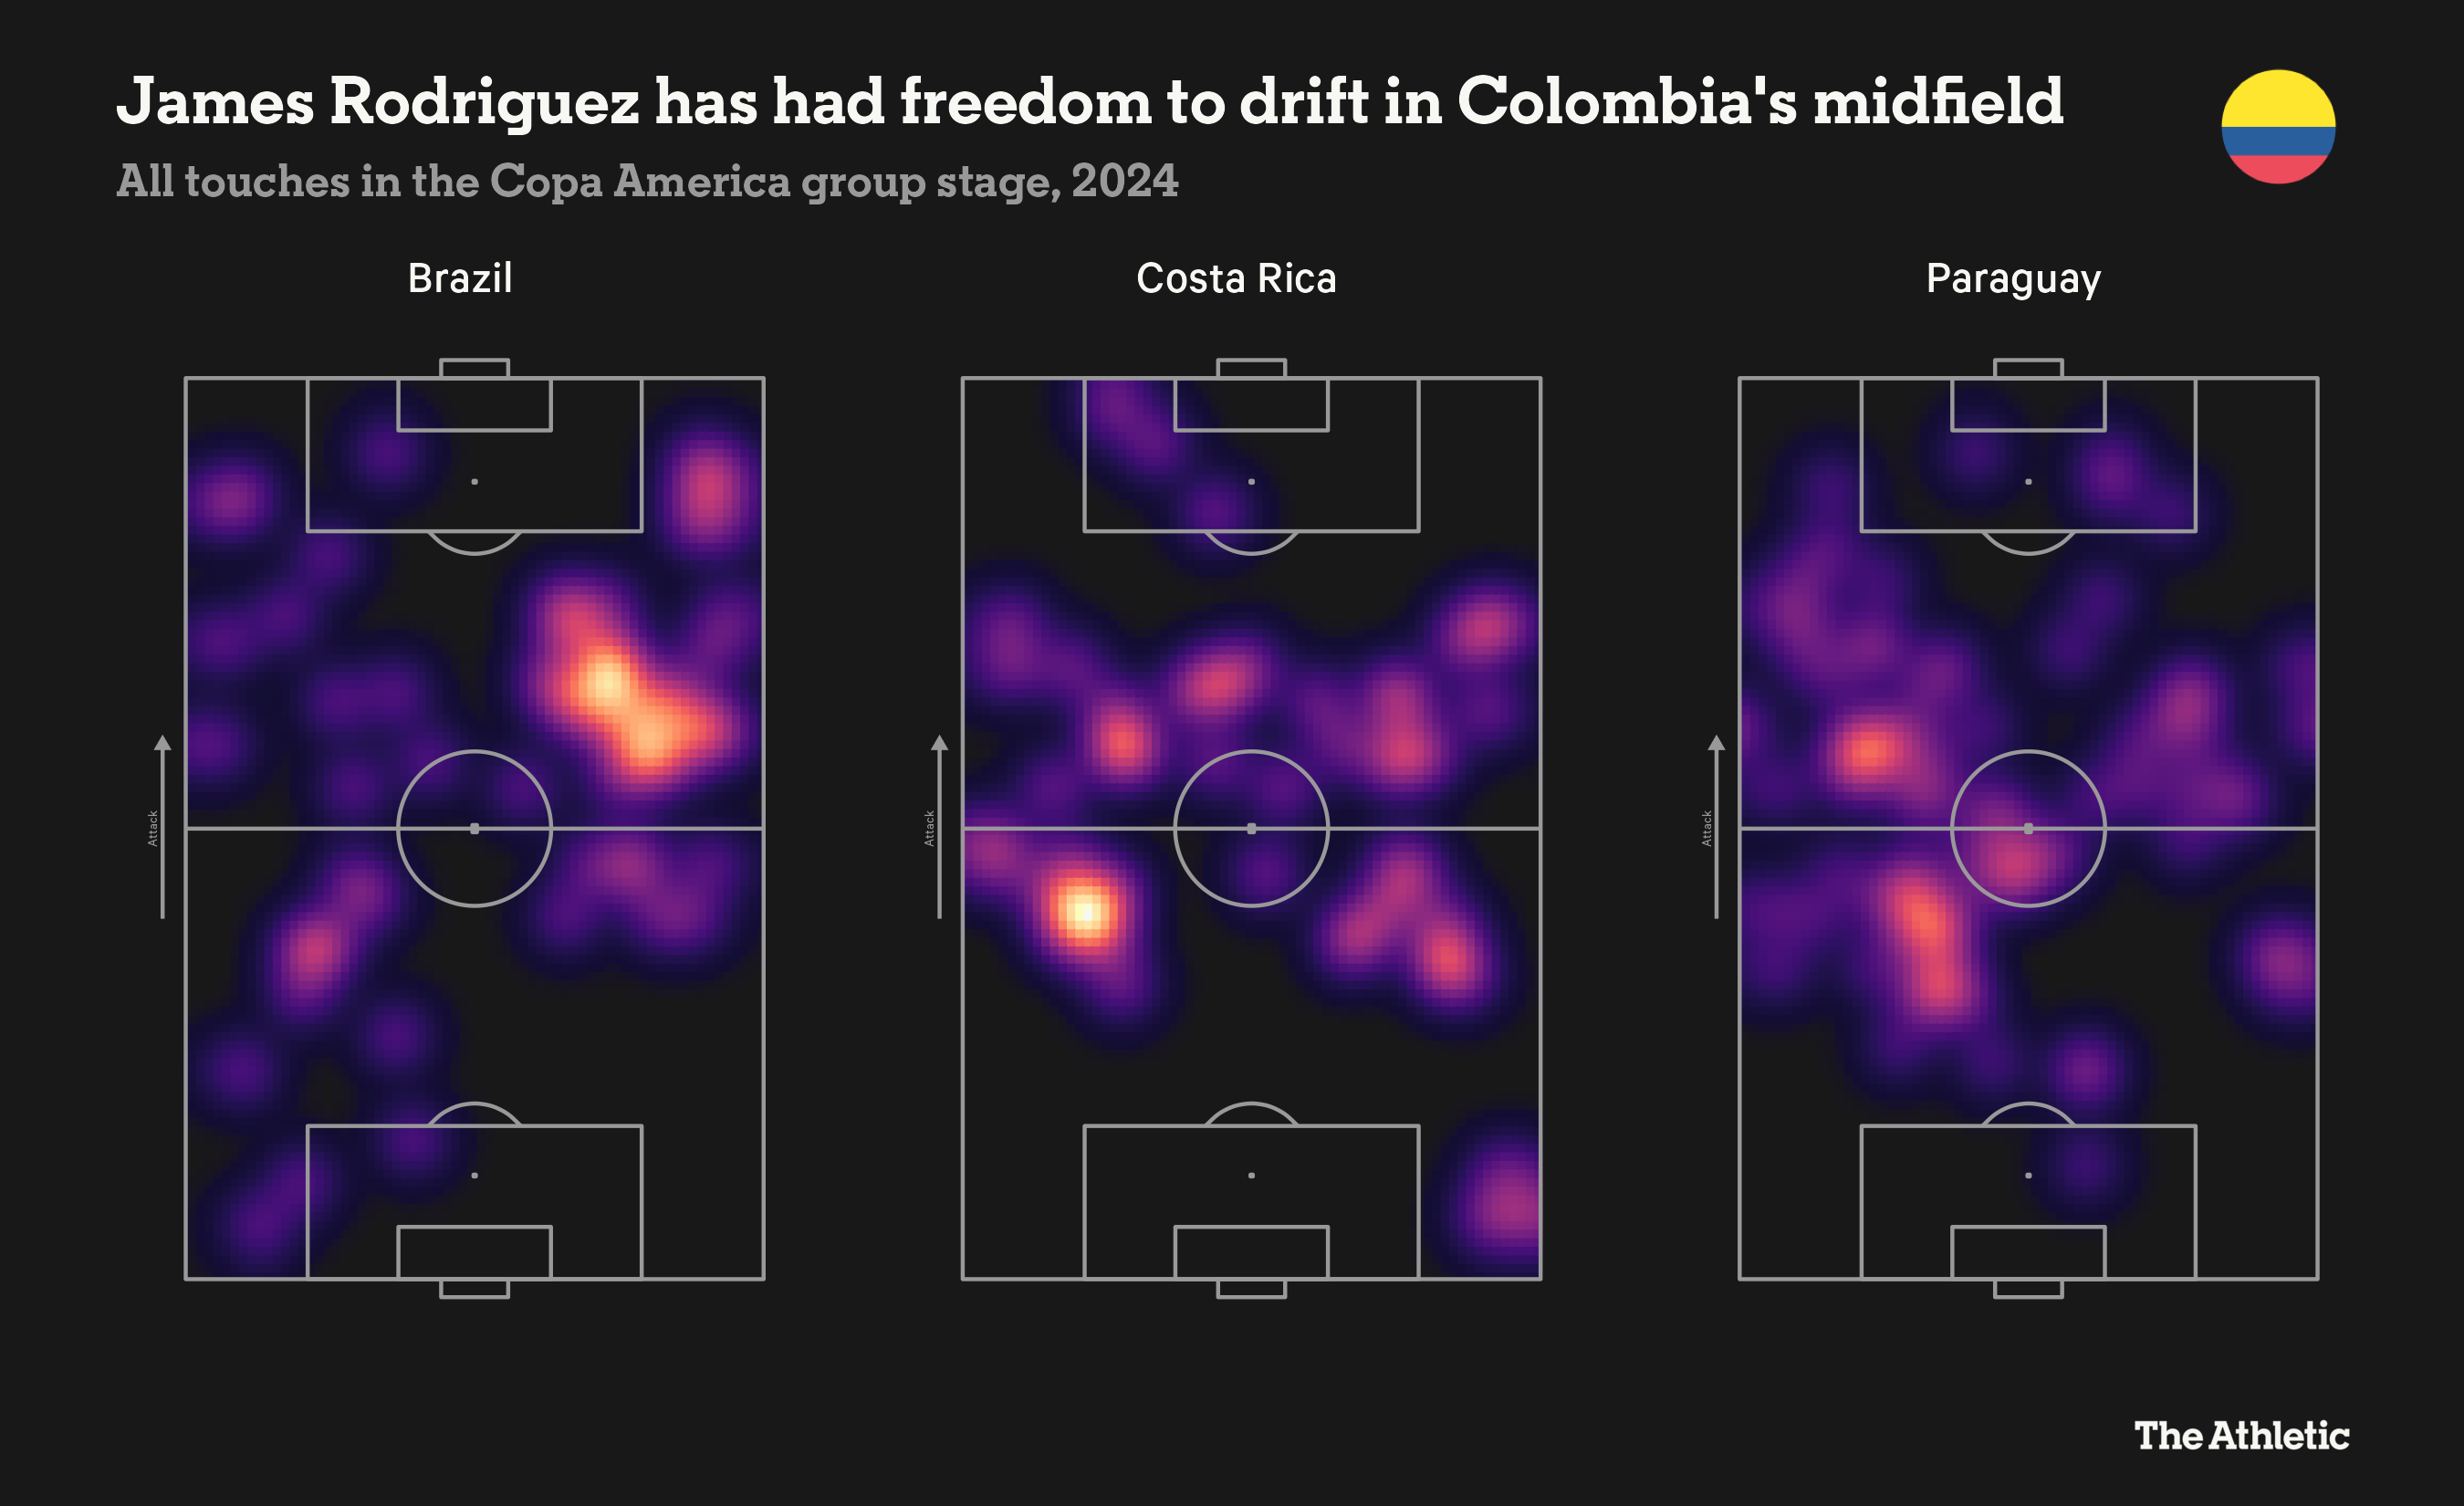 James Rodriguez lights up the Copa America and is at the heart of Colombia's incredible run